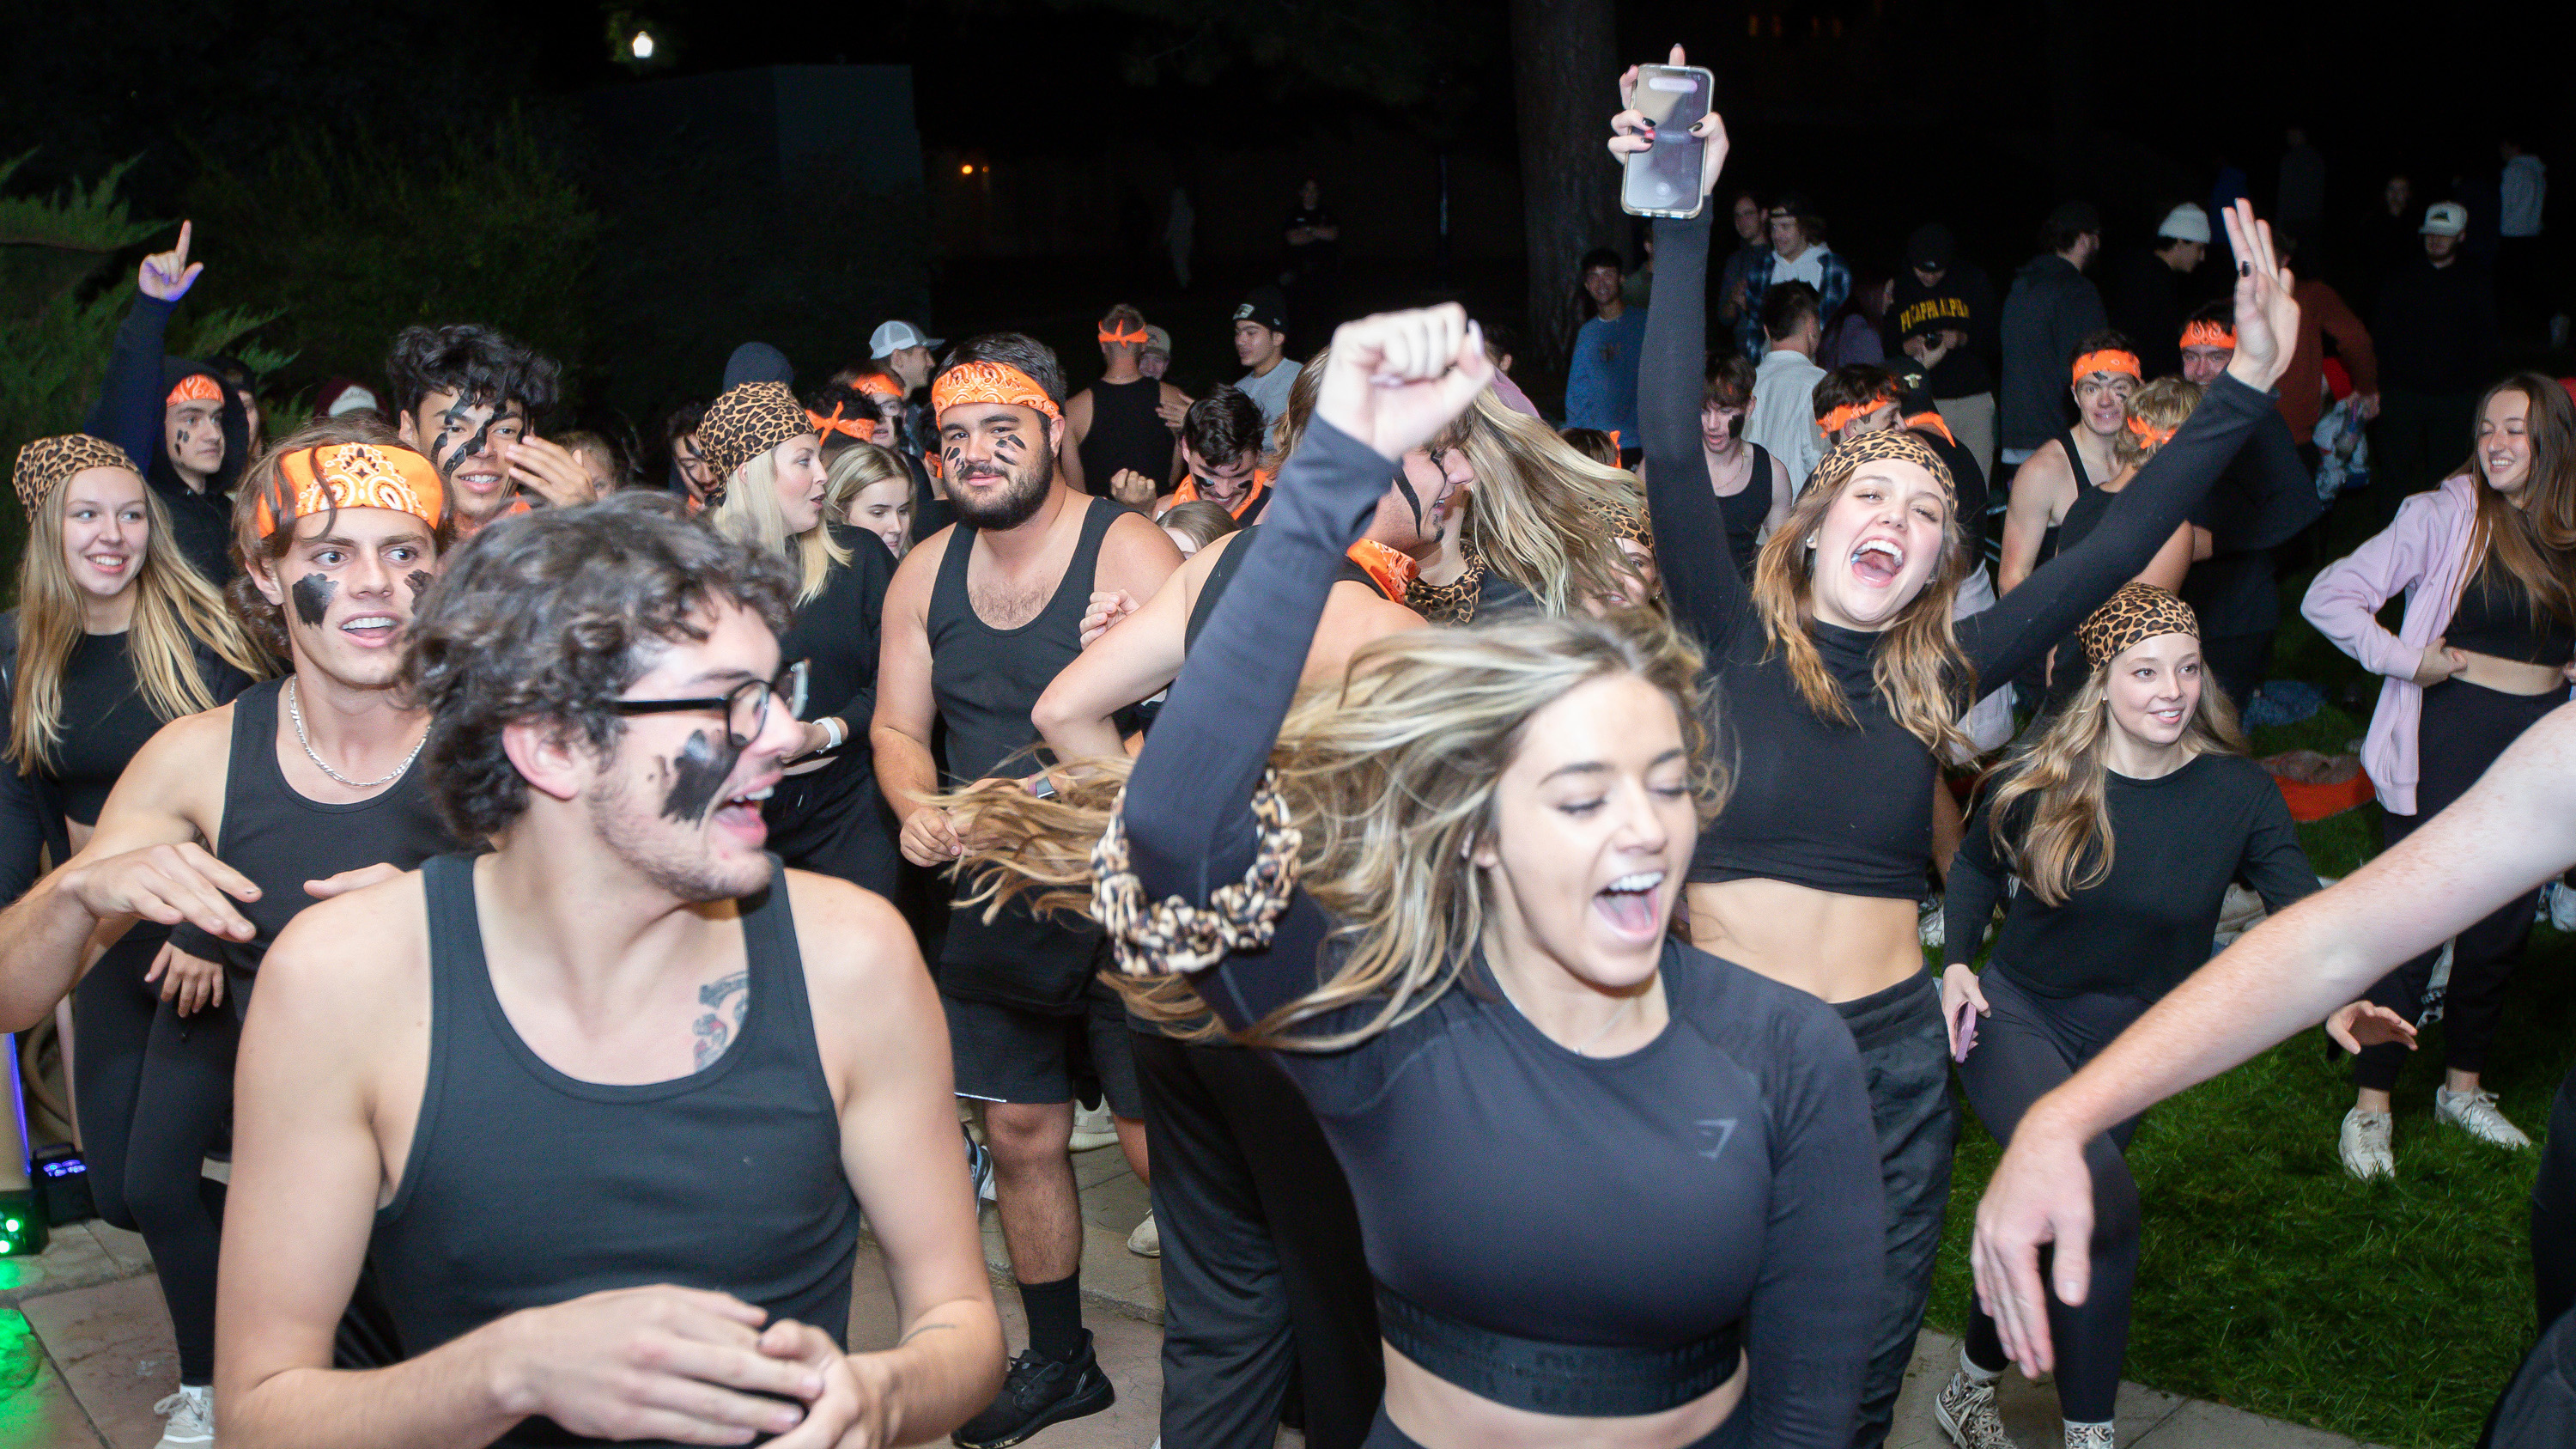 Fraternity and sorority members dressed in black and orange dancing together